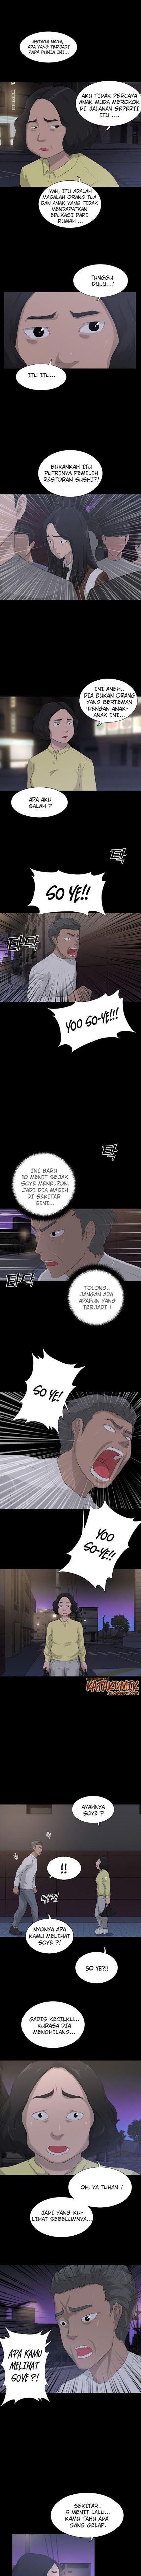 Trigger Chapter 10